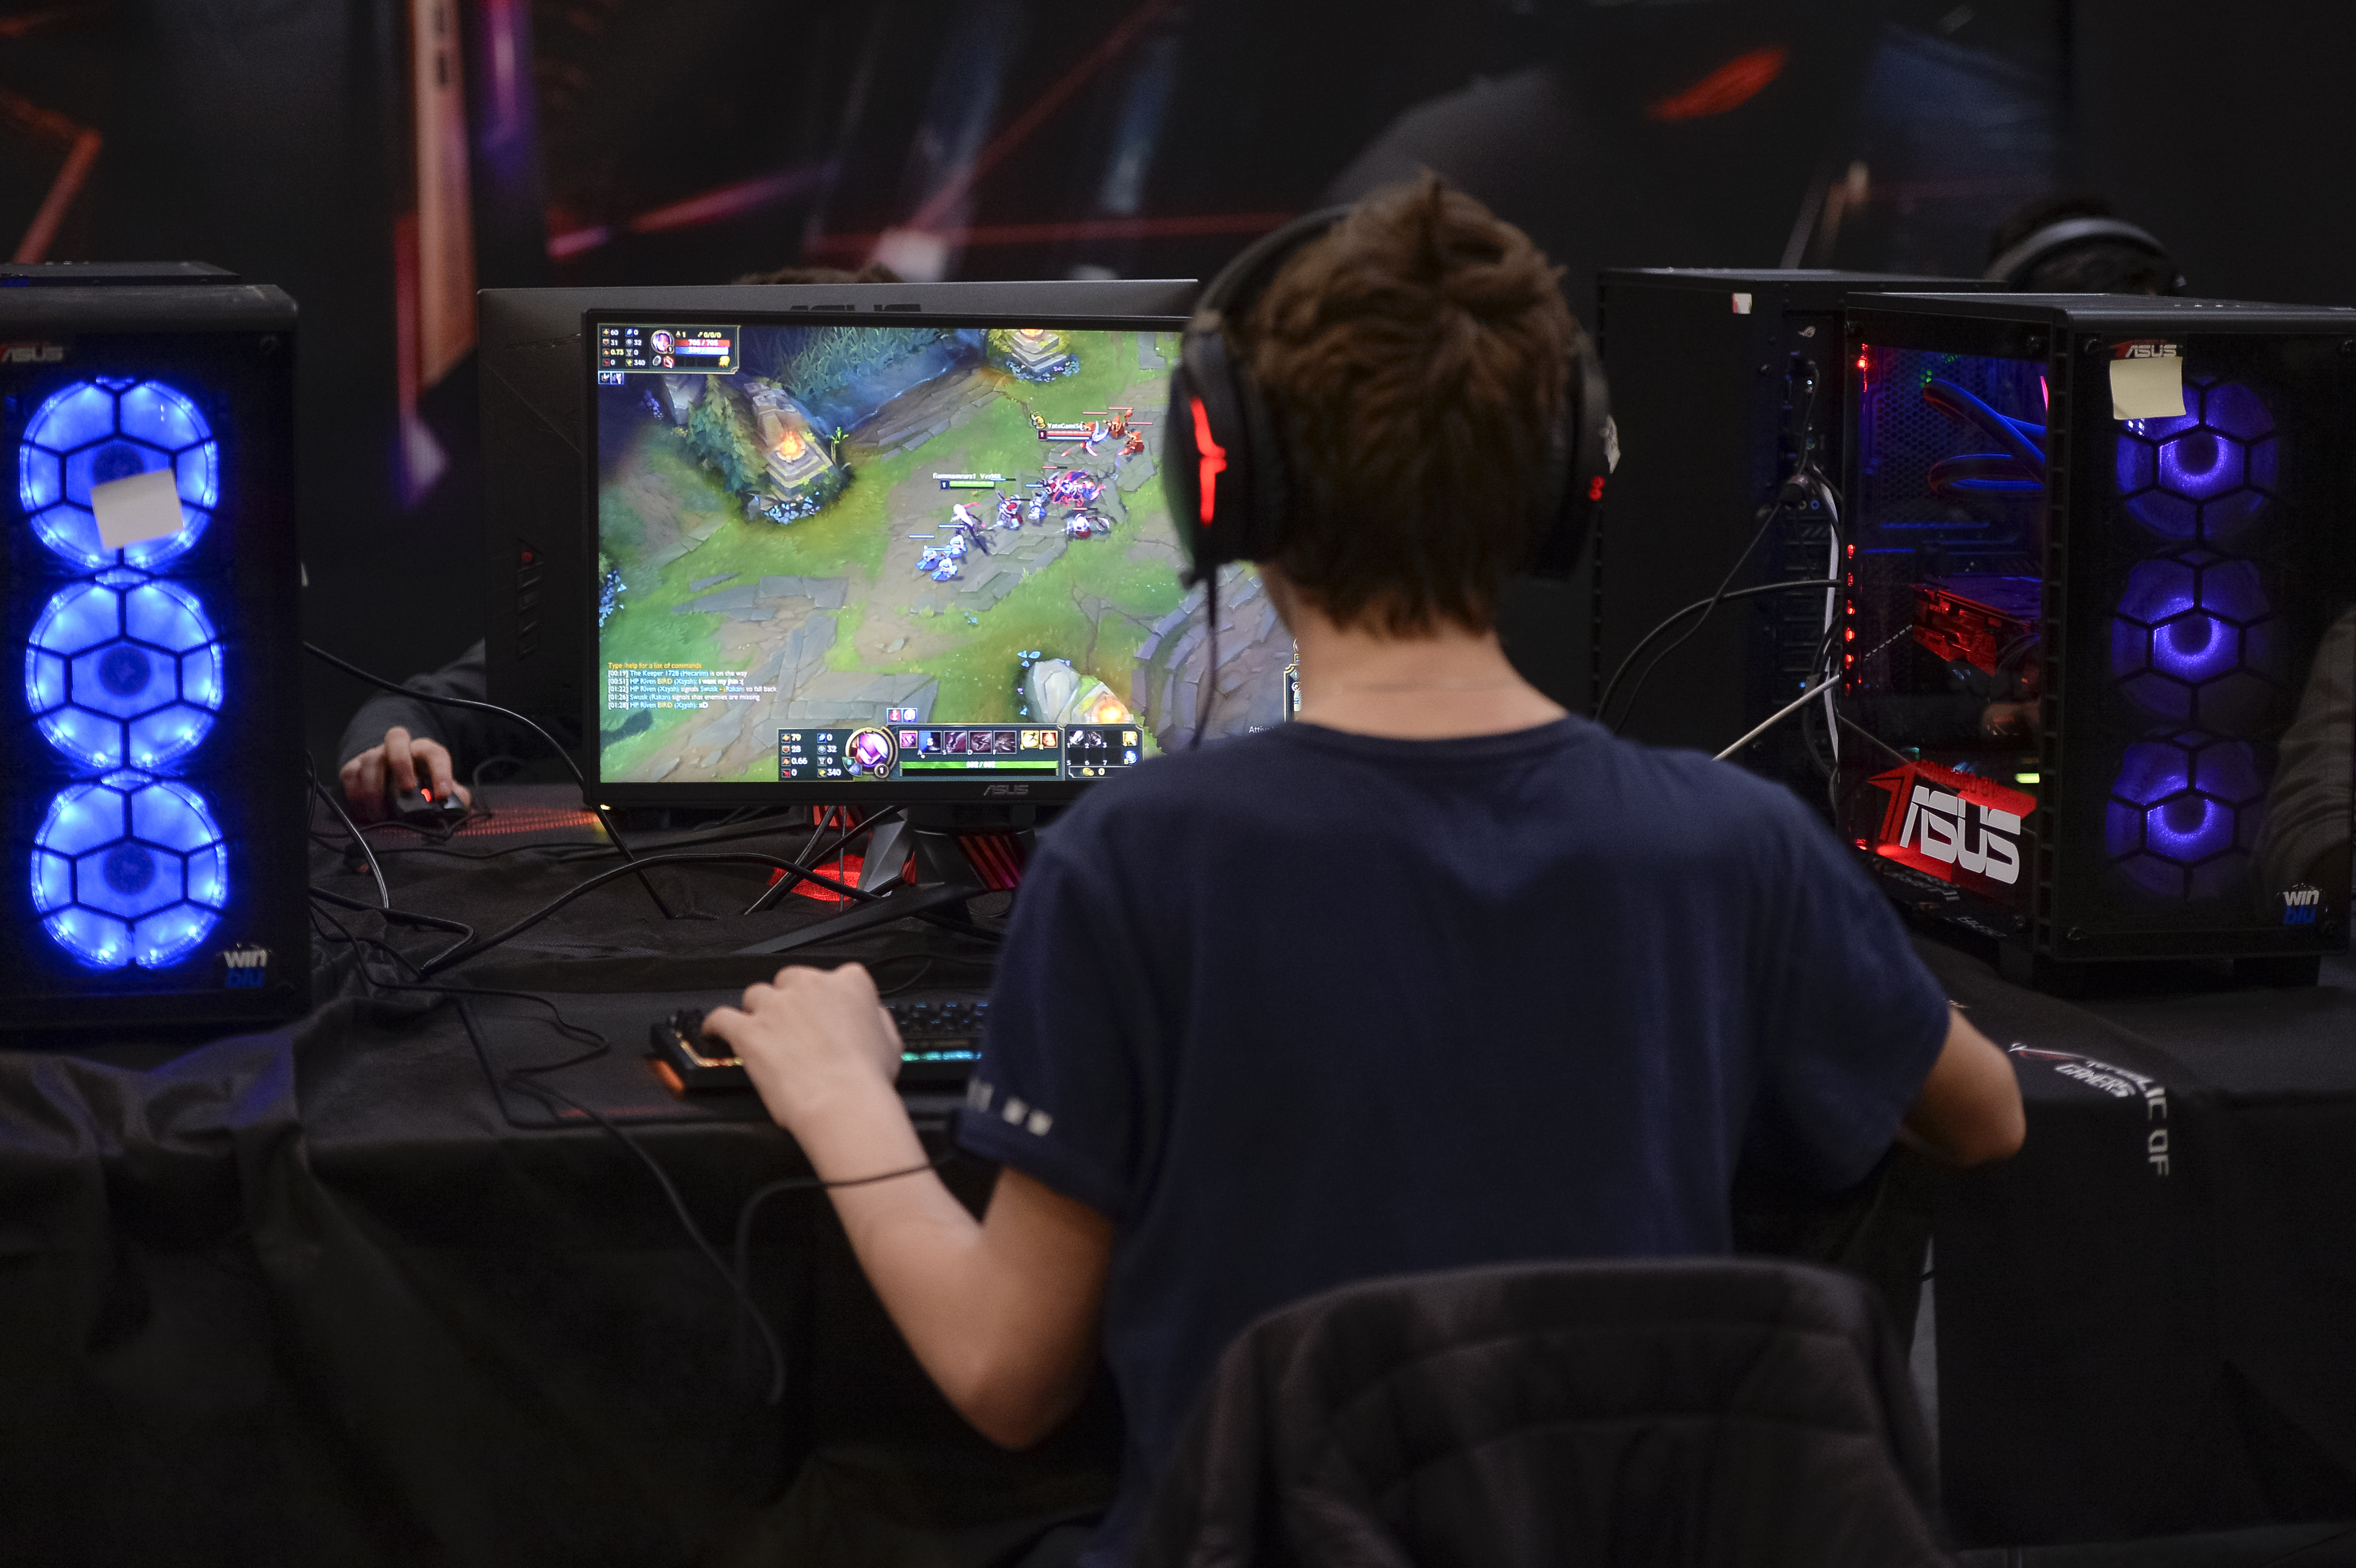 Gamer plays "League of Legends" video game during the Torino Comics' fair in Italy. (Nicolò Campo/LightRocket via Getty Images)